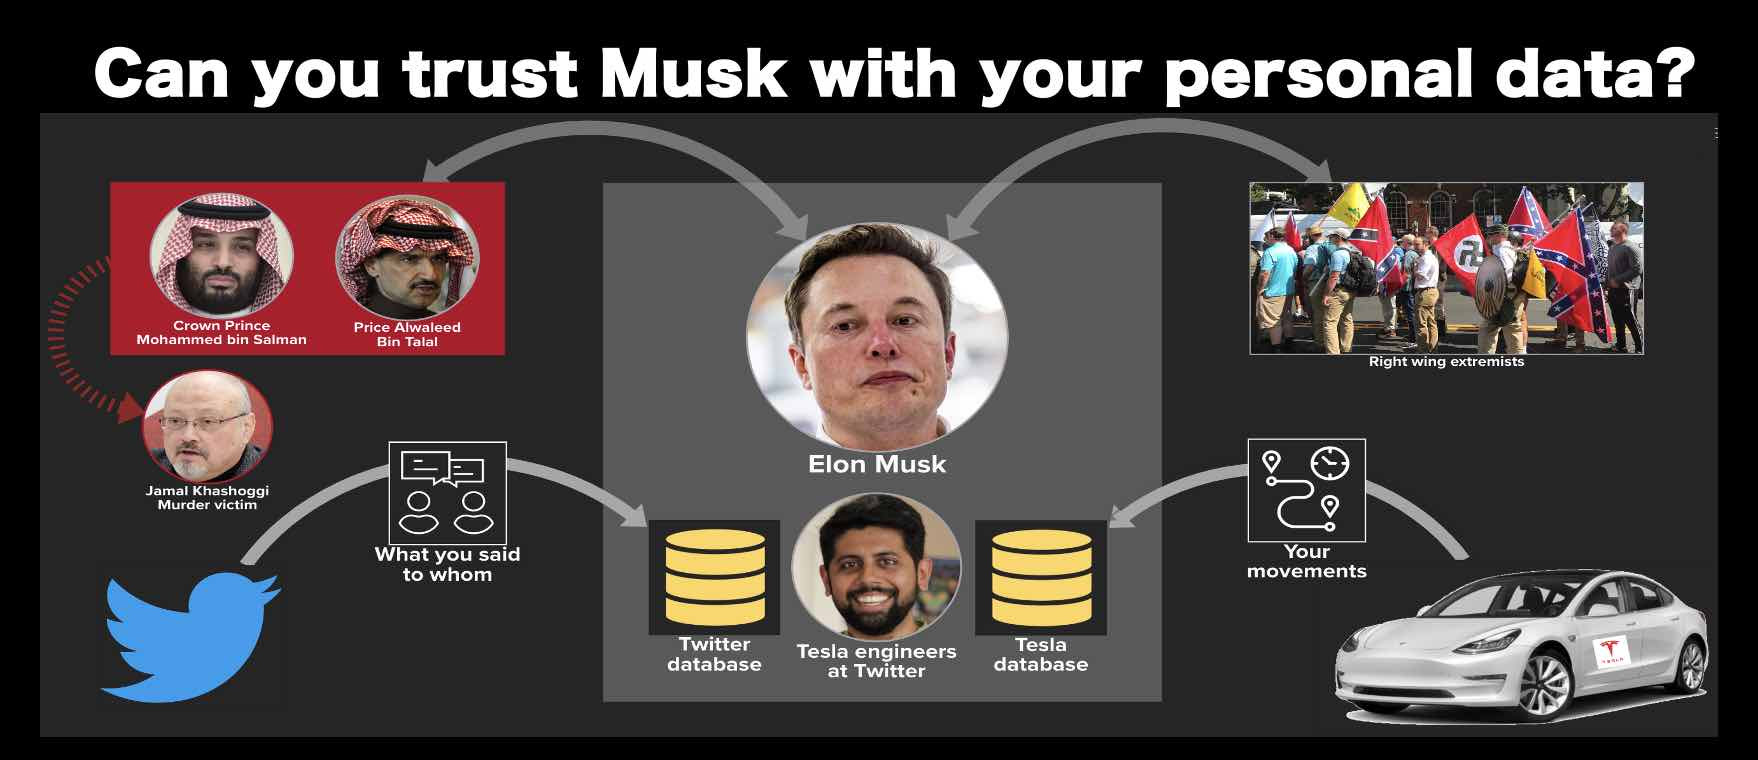 Can you trust Musk with your personal movement (Tesla) and personal discussions (Twitter) data?